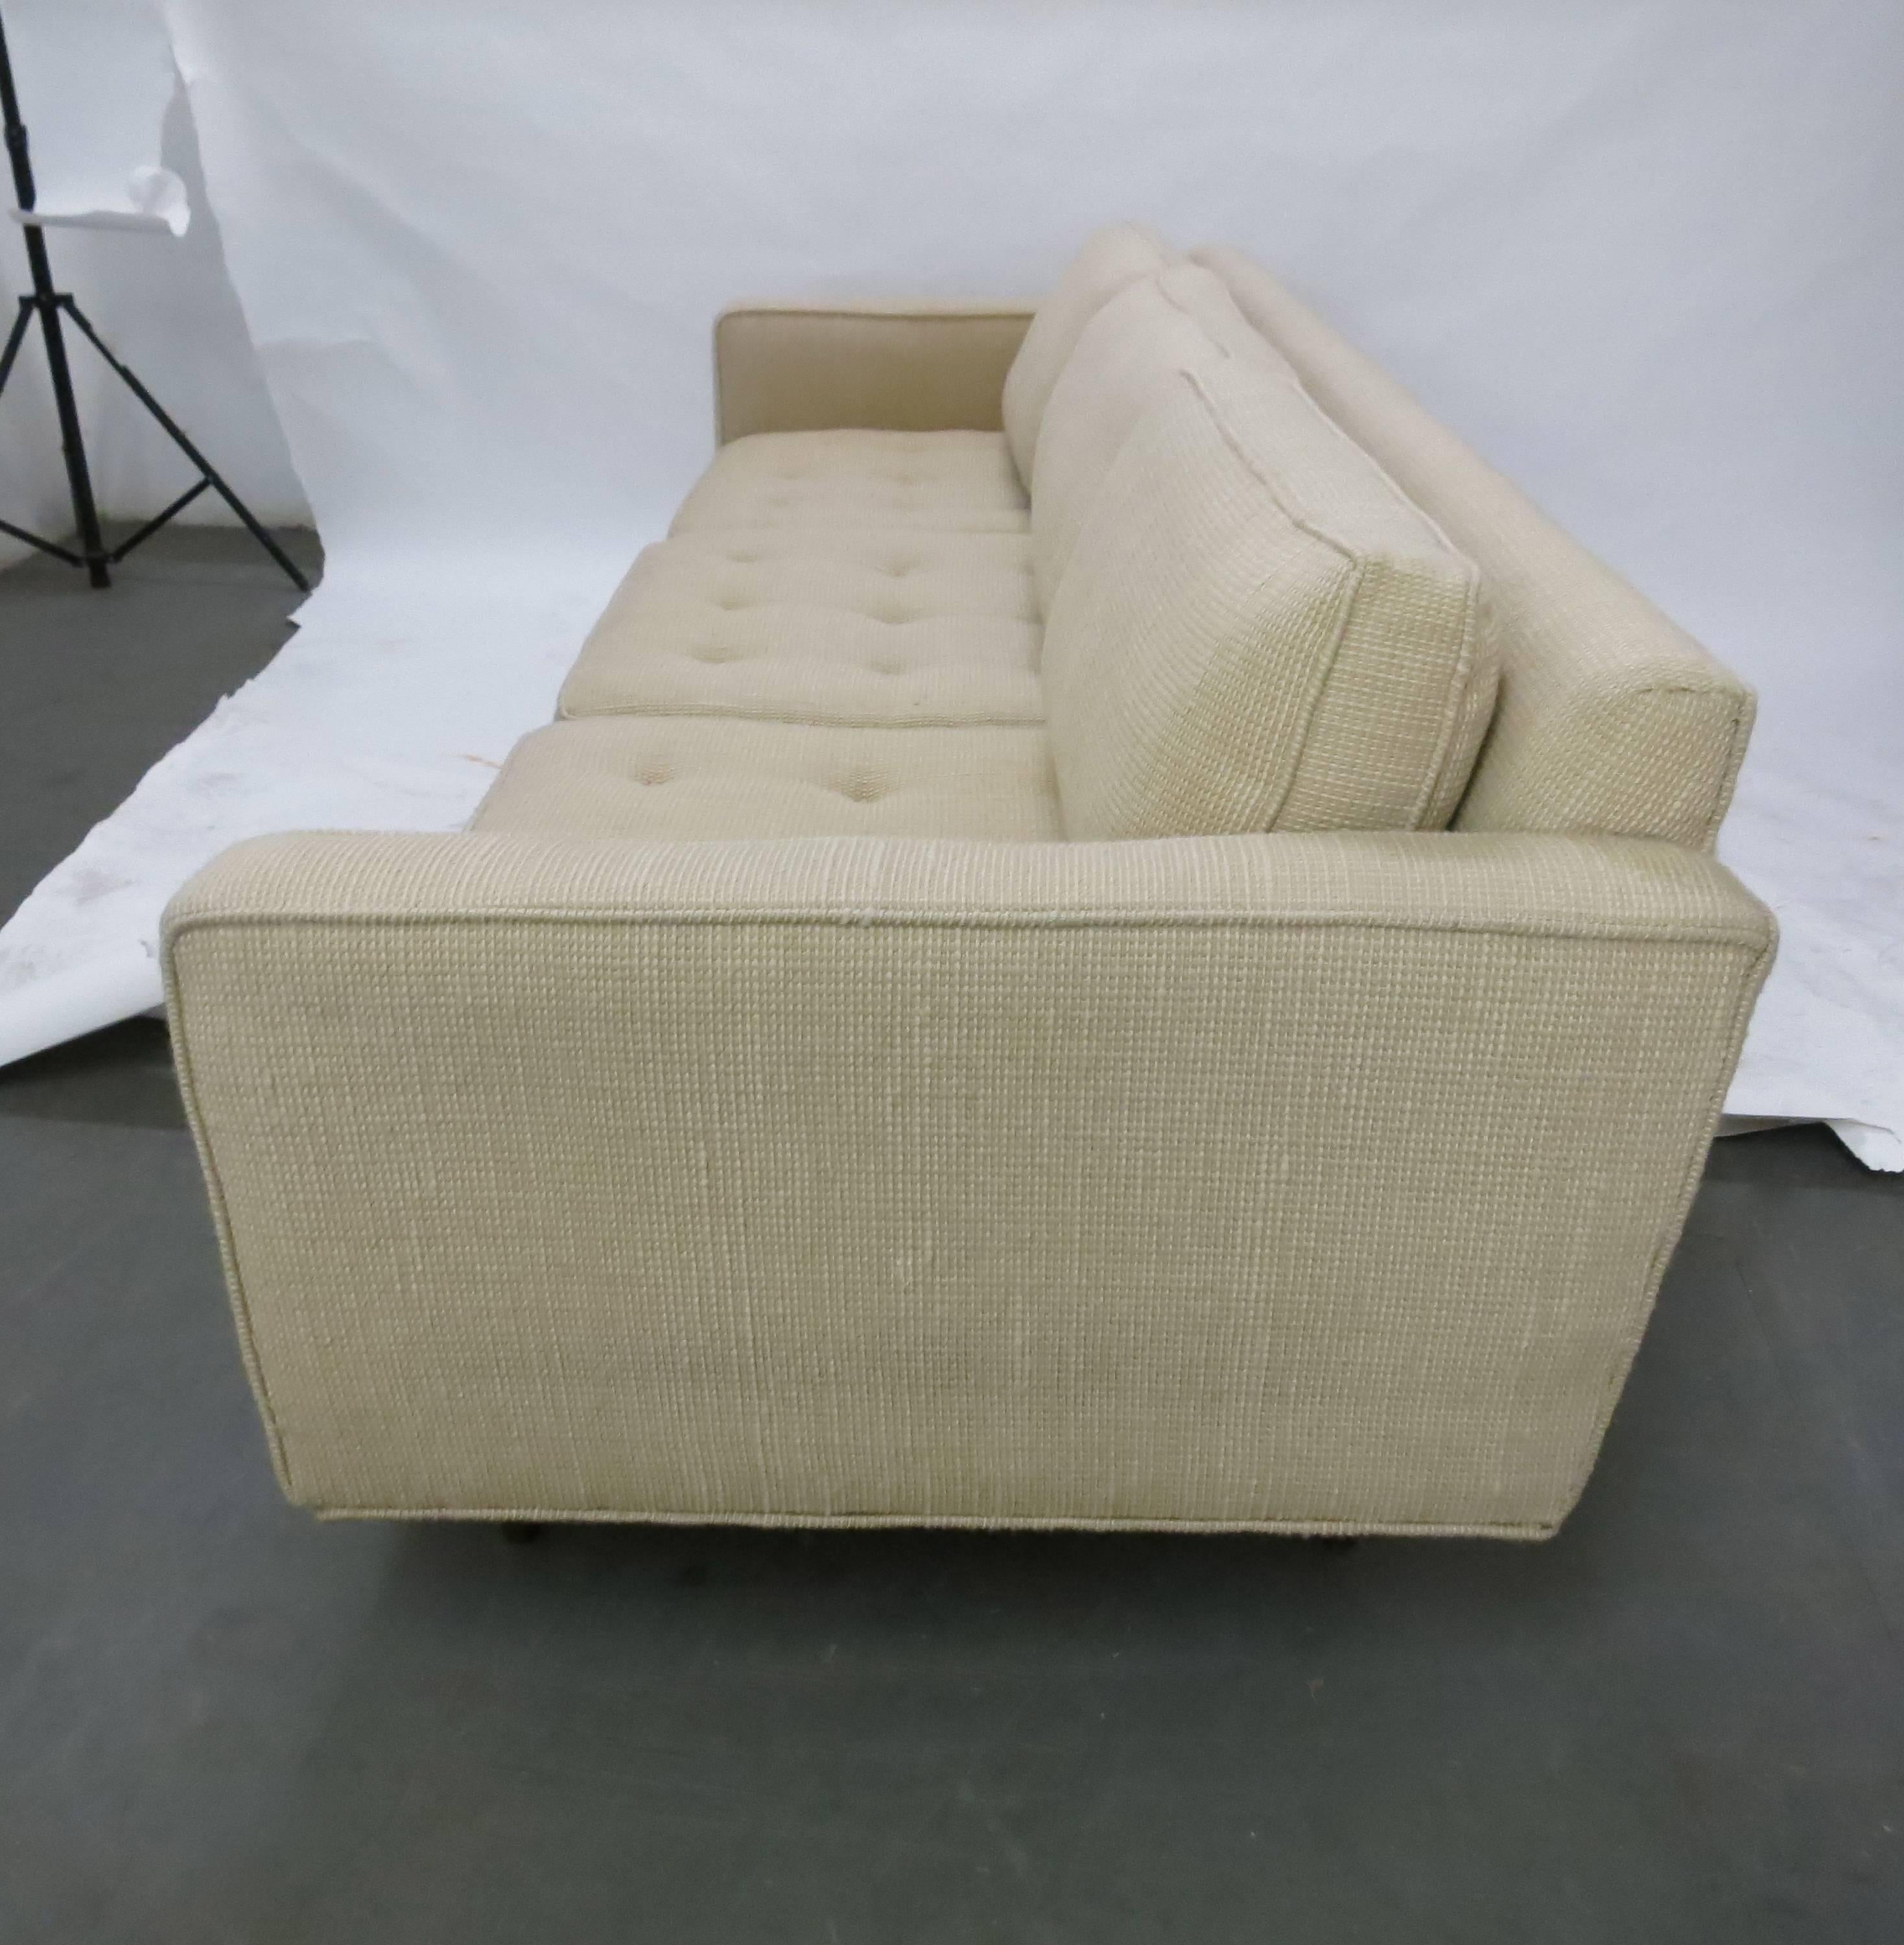 Mid-Century Modern Sofa by Charles Pfister for Knoll, Original Fabric circa 1960 Made in USA